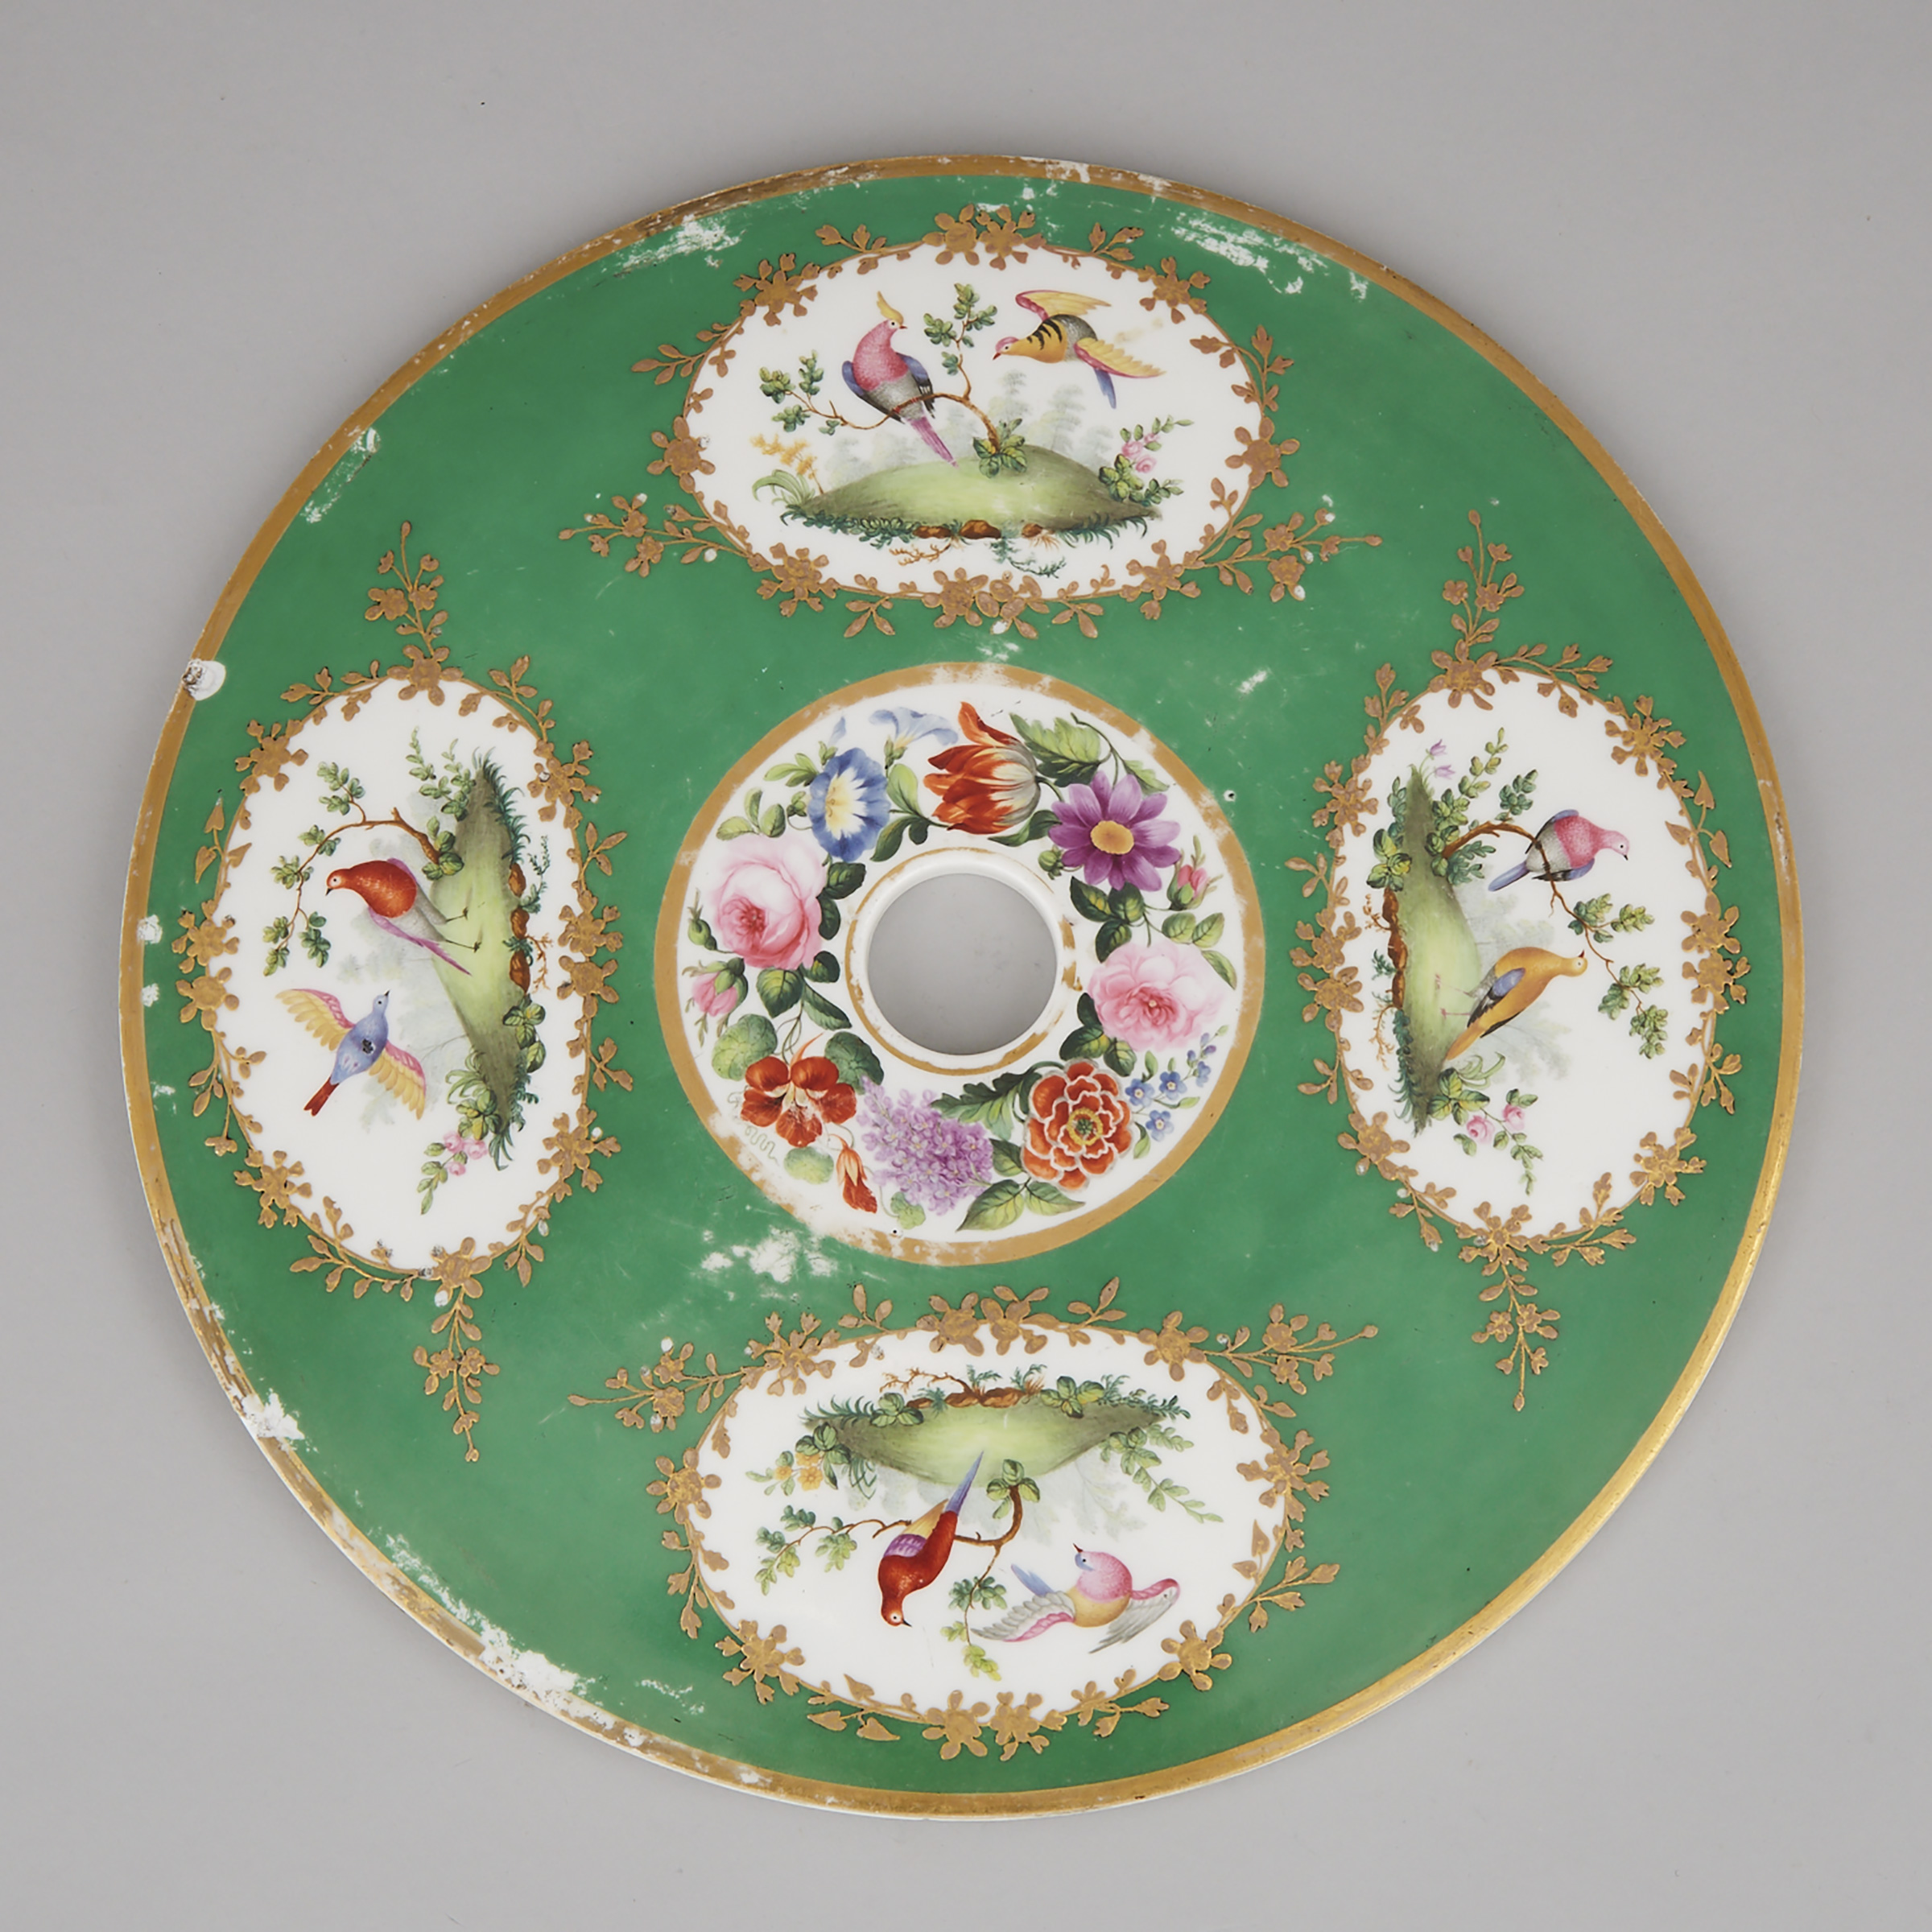 French Porcelain Table Top, probably Sèvres, 19th century